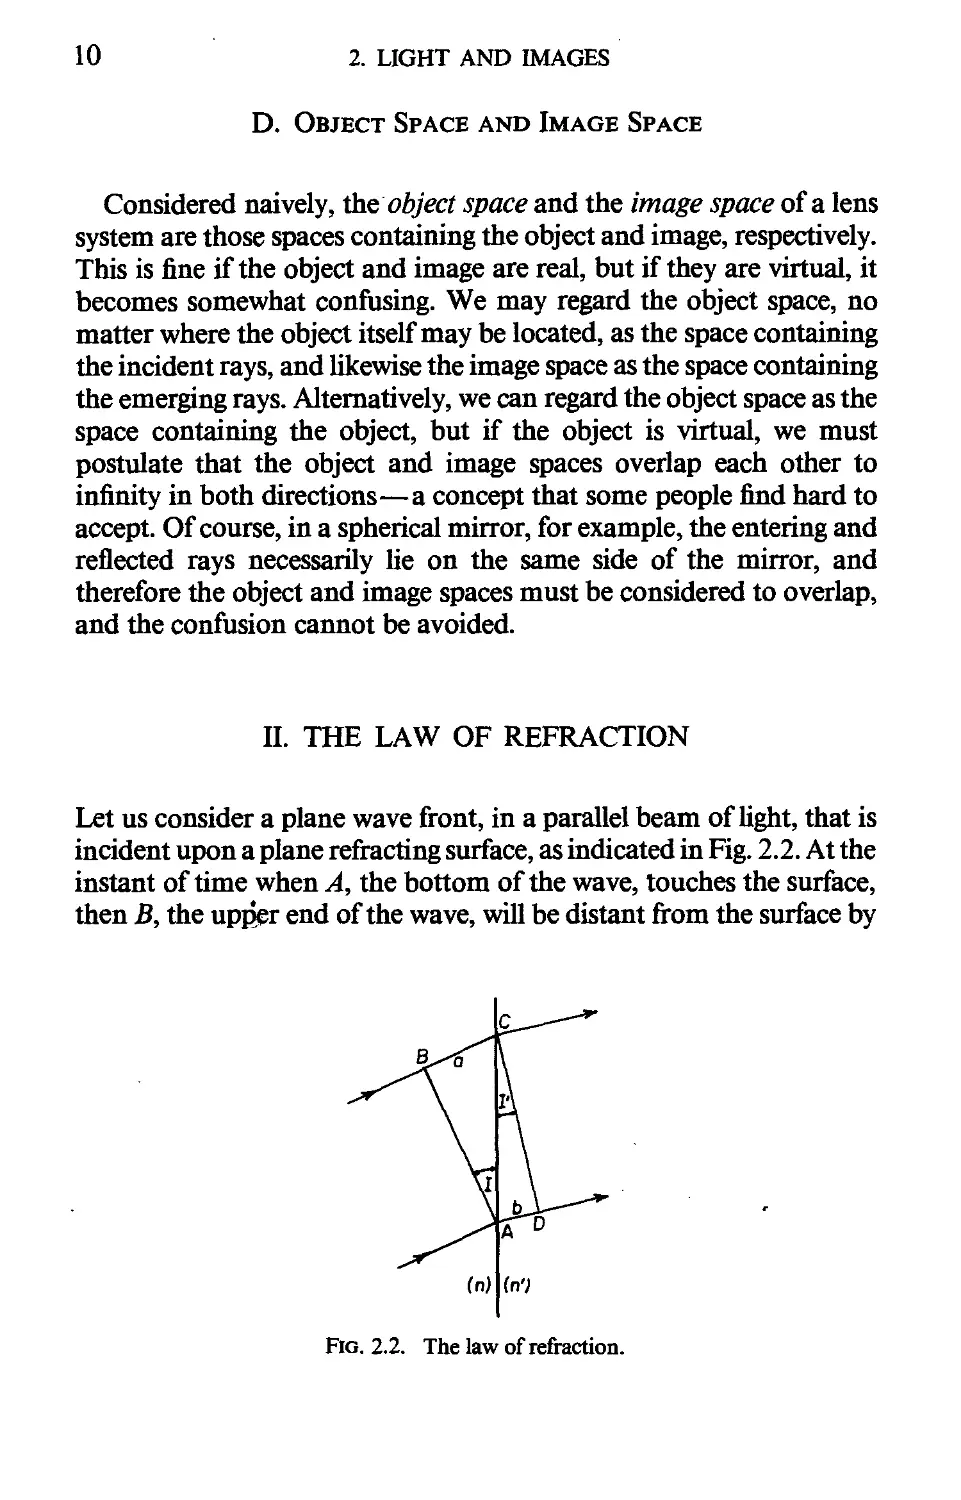 D. Object Space and Image Space
II. The Law Of Refraction